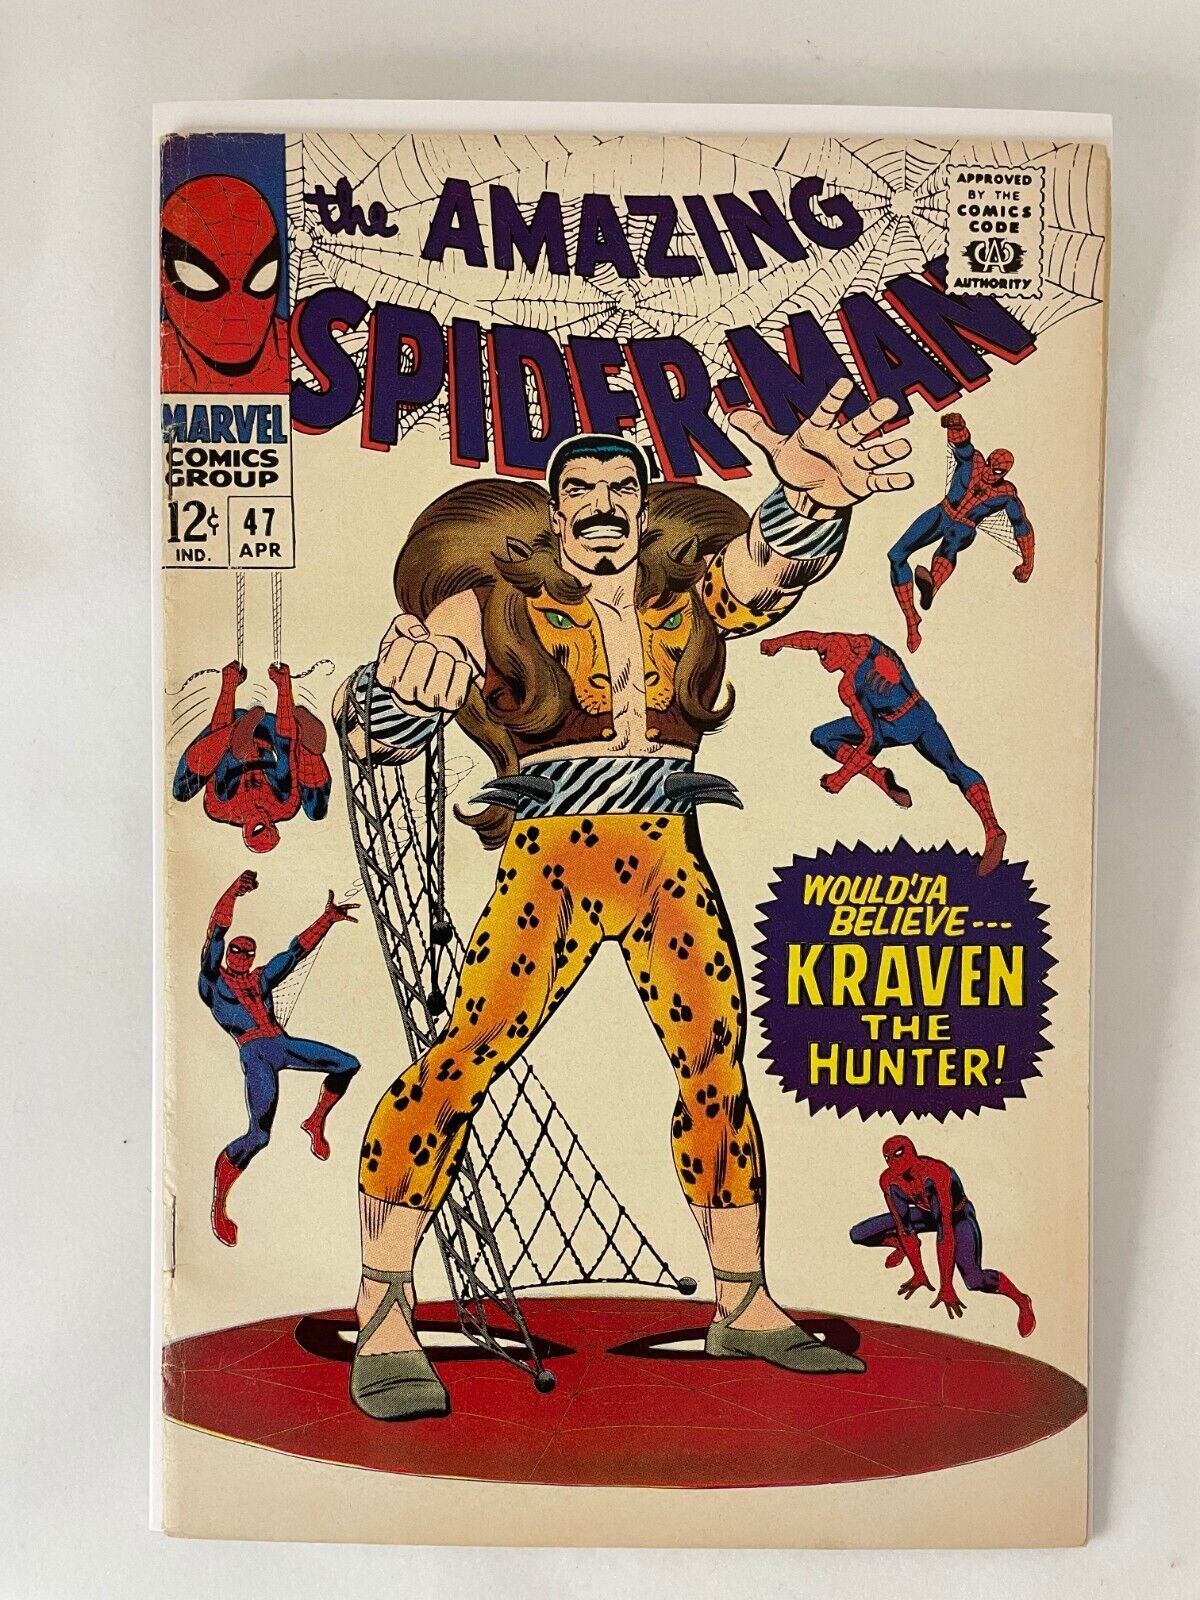 Amazing Spider-Man #47 - Early Kraven the Hunter appearance (1967)